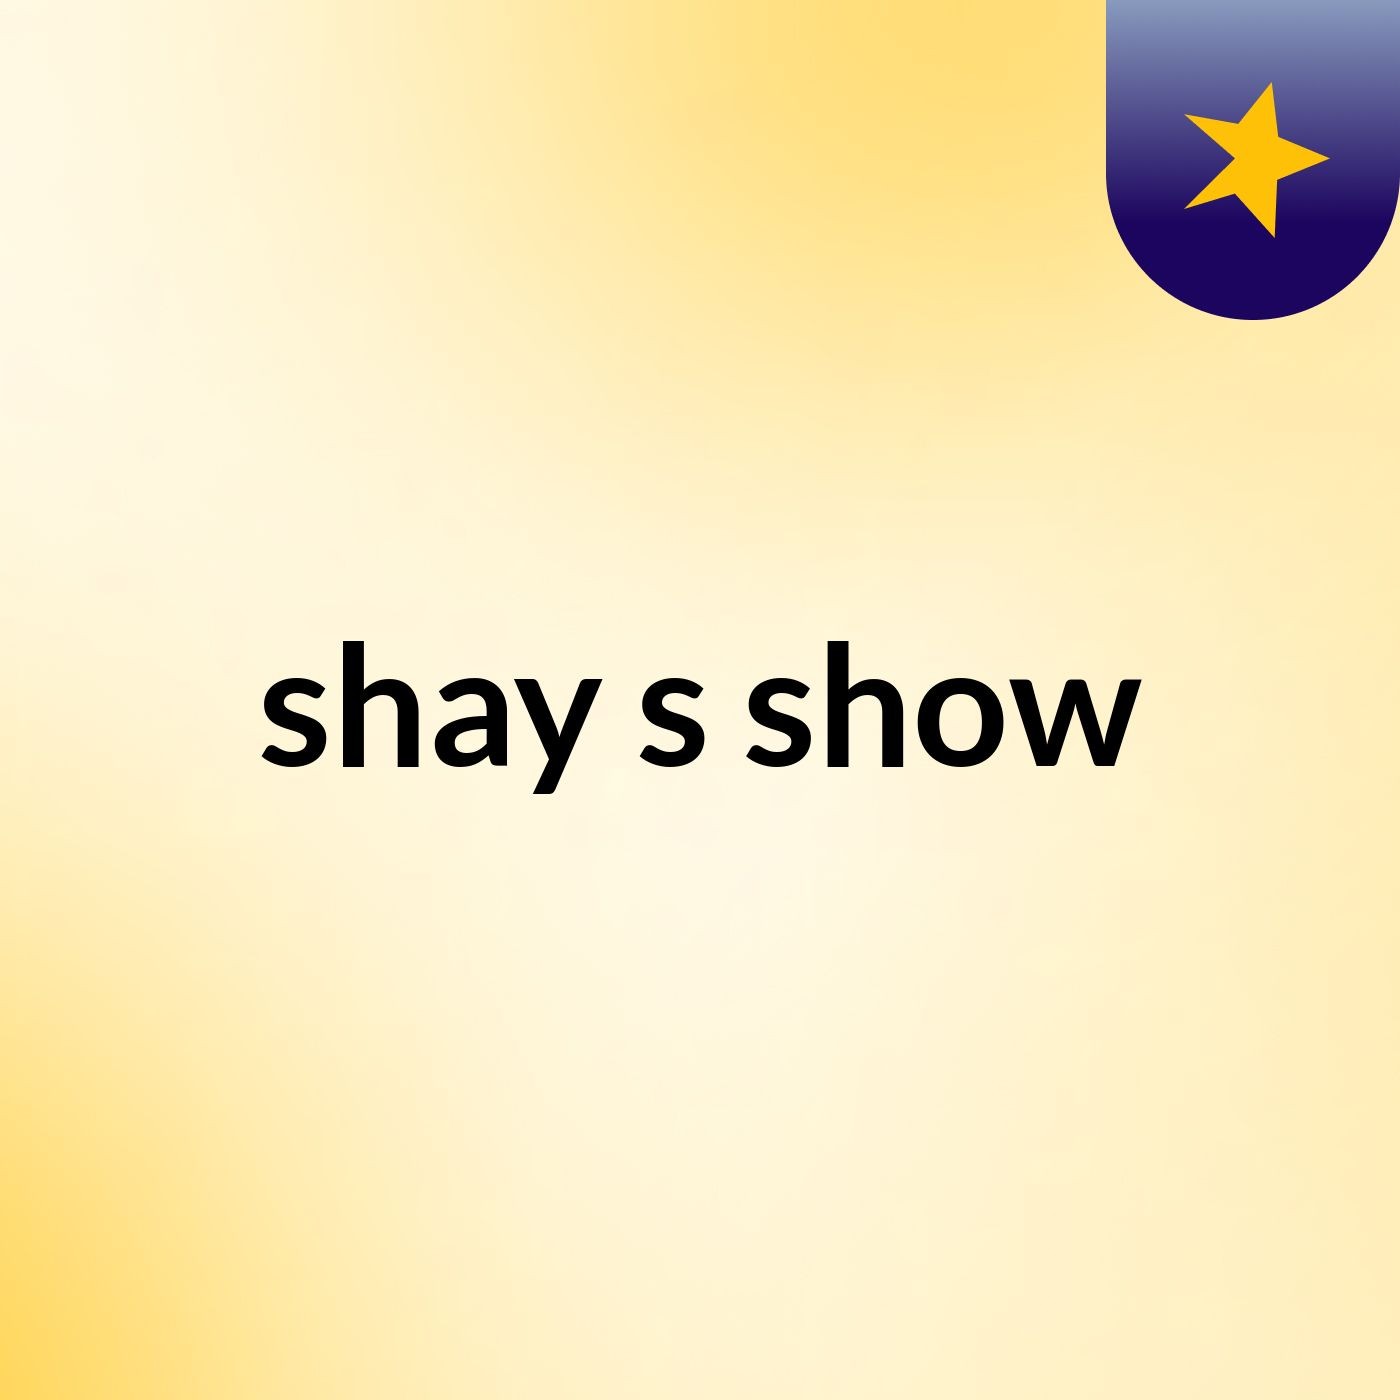 Episode 2 - shay's show